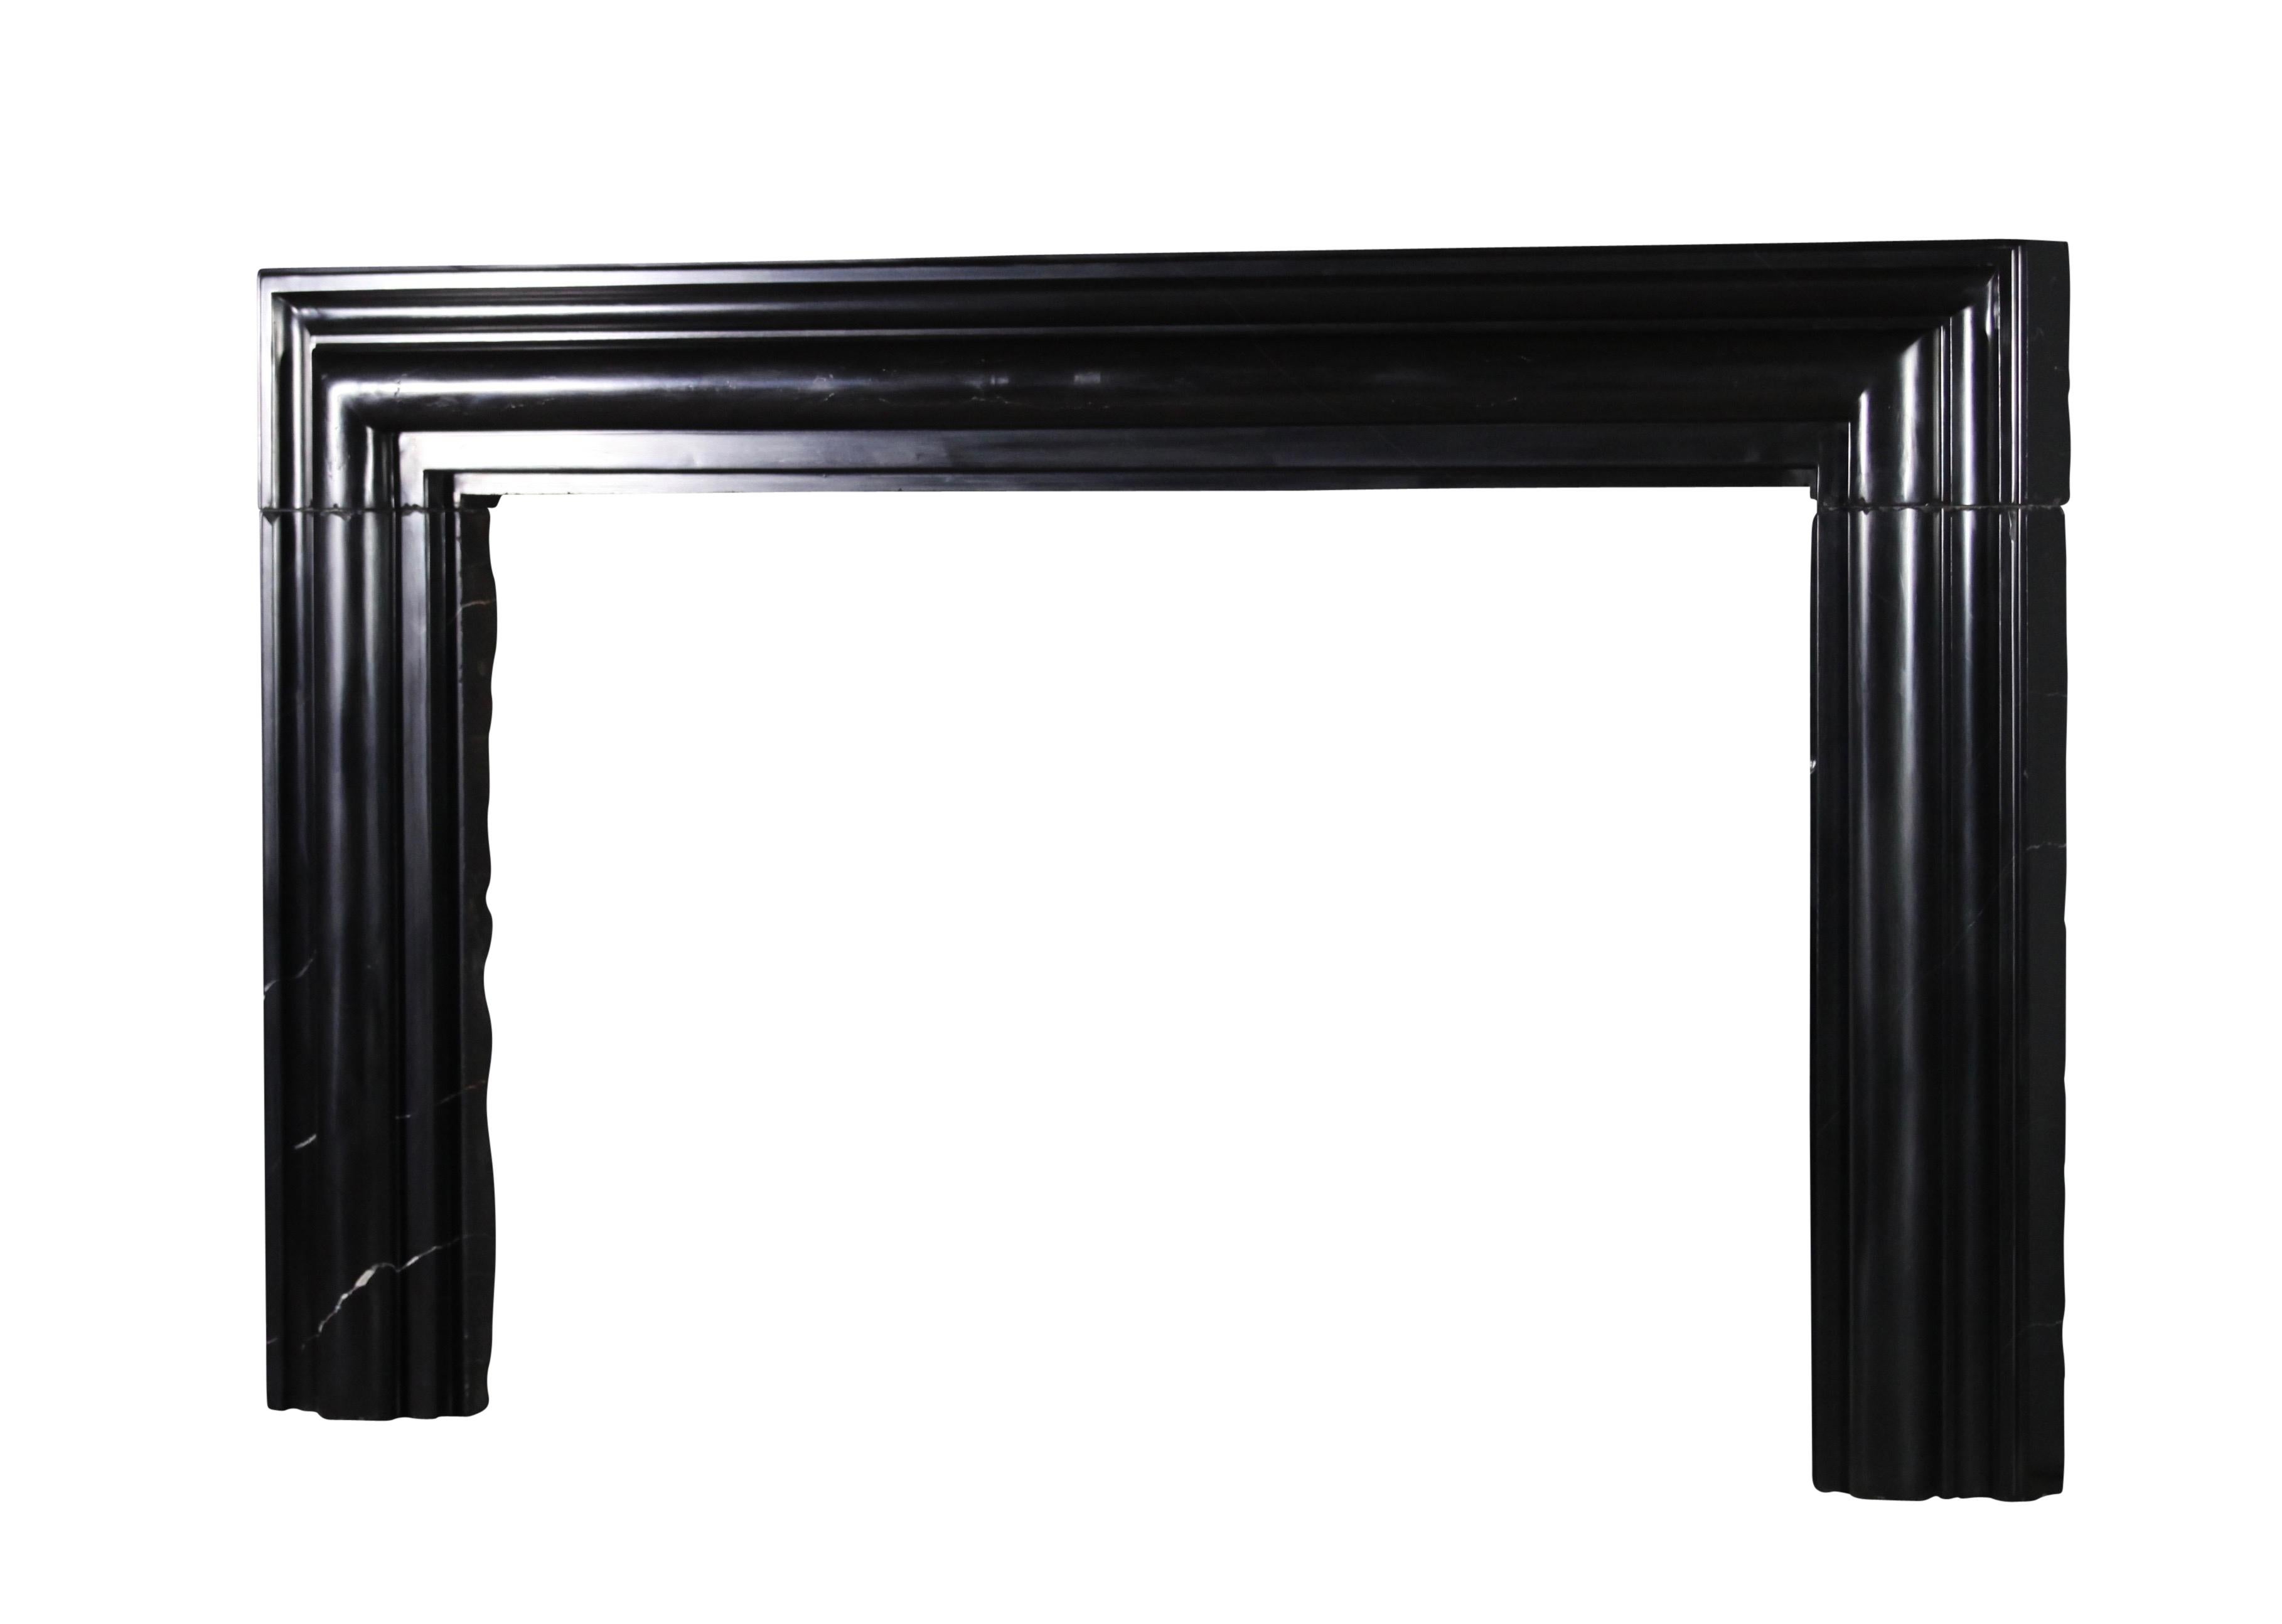 This one of a kind original antique fireplace is one of a collection of four special surrounds. The collection was reclaimed out of Brussels Great Maison de Maitre house.
It was executed in the bespoke Belgian Black marble. The size of this one is